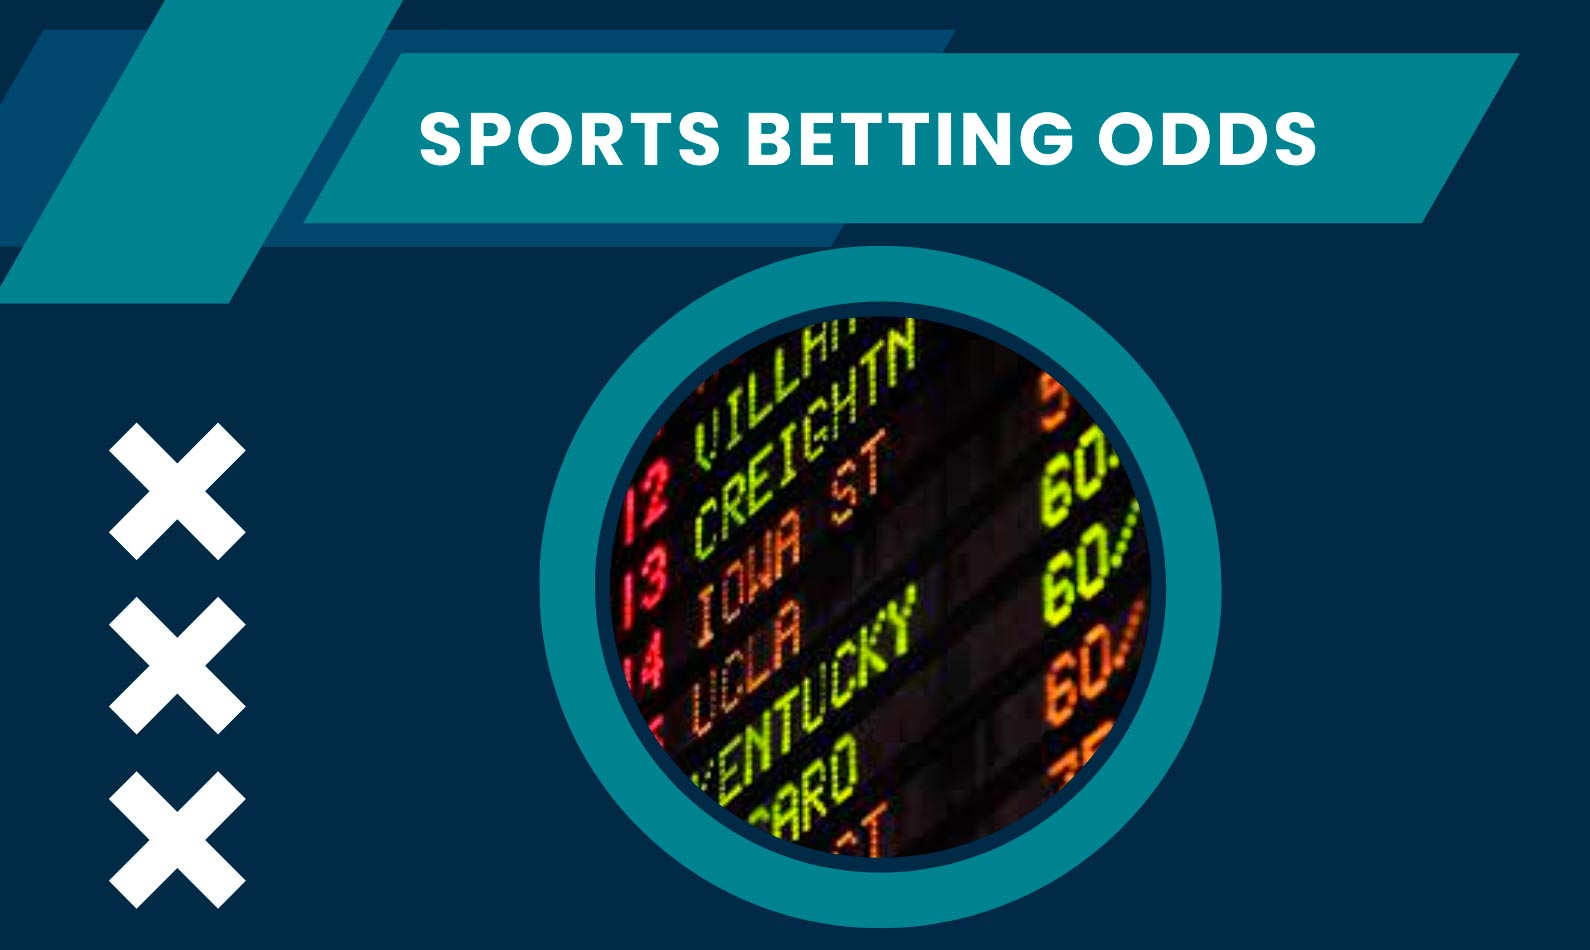 Sports Betting Odds: Understanding How to Calculate and Find the Best Odds